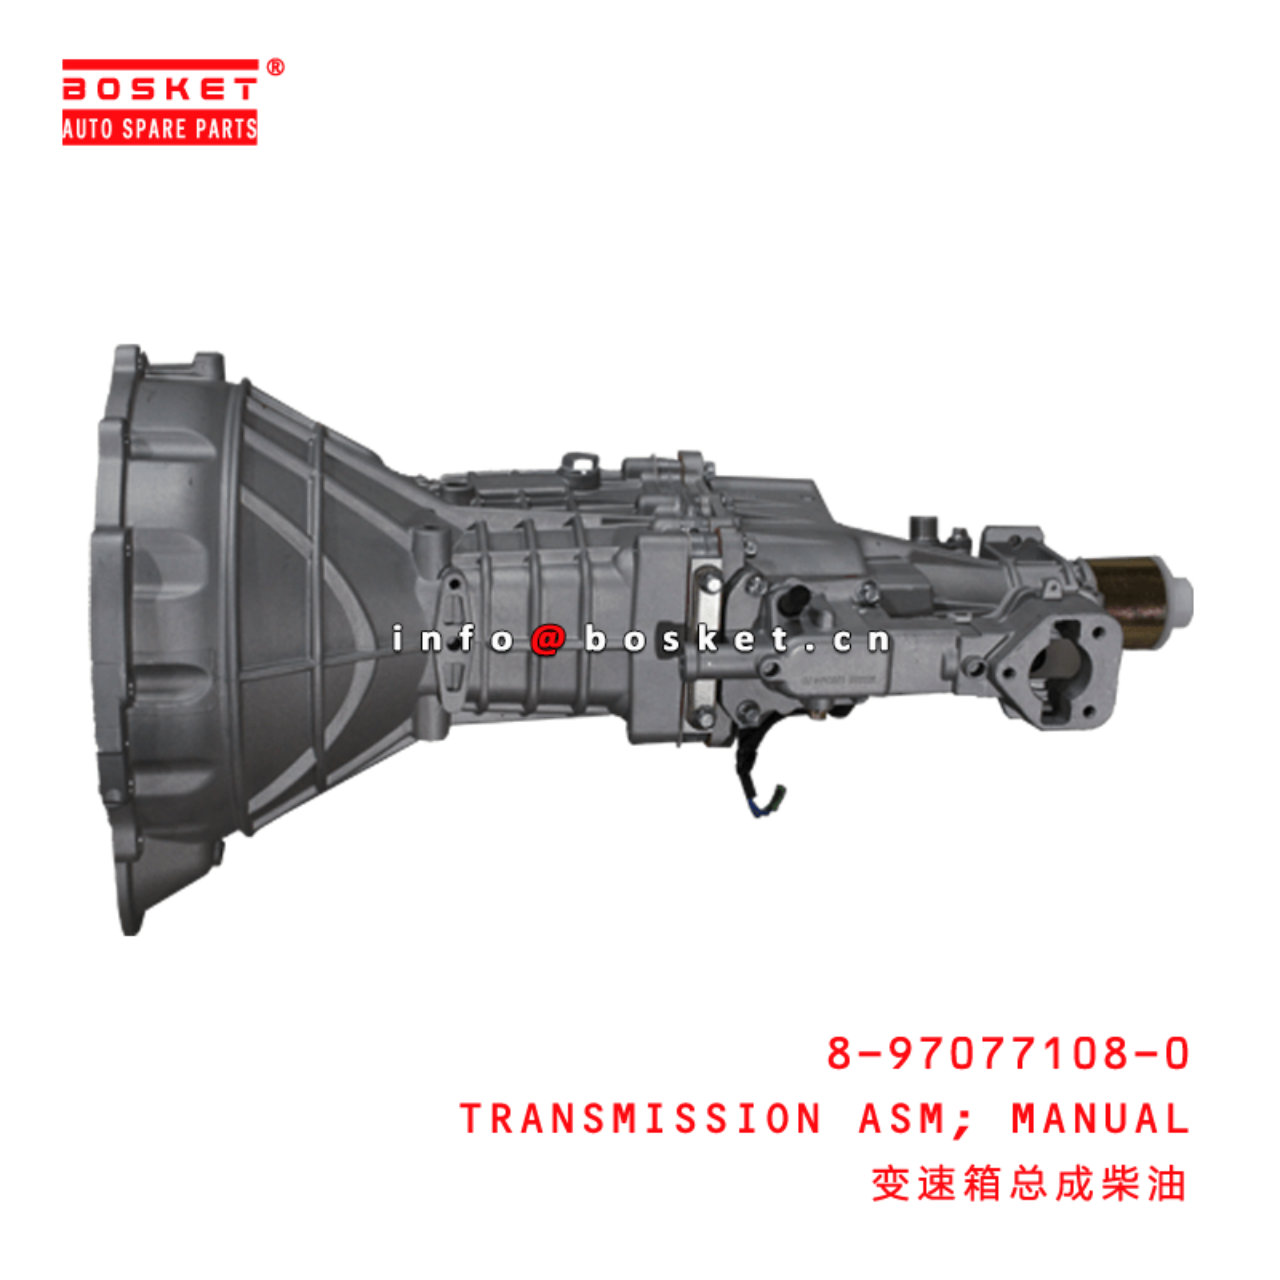 8-97077108-0 8970771080 Manual Transmission Assembly Suitable for ISUZU MSG5E TFR54 4JA1